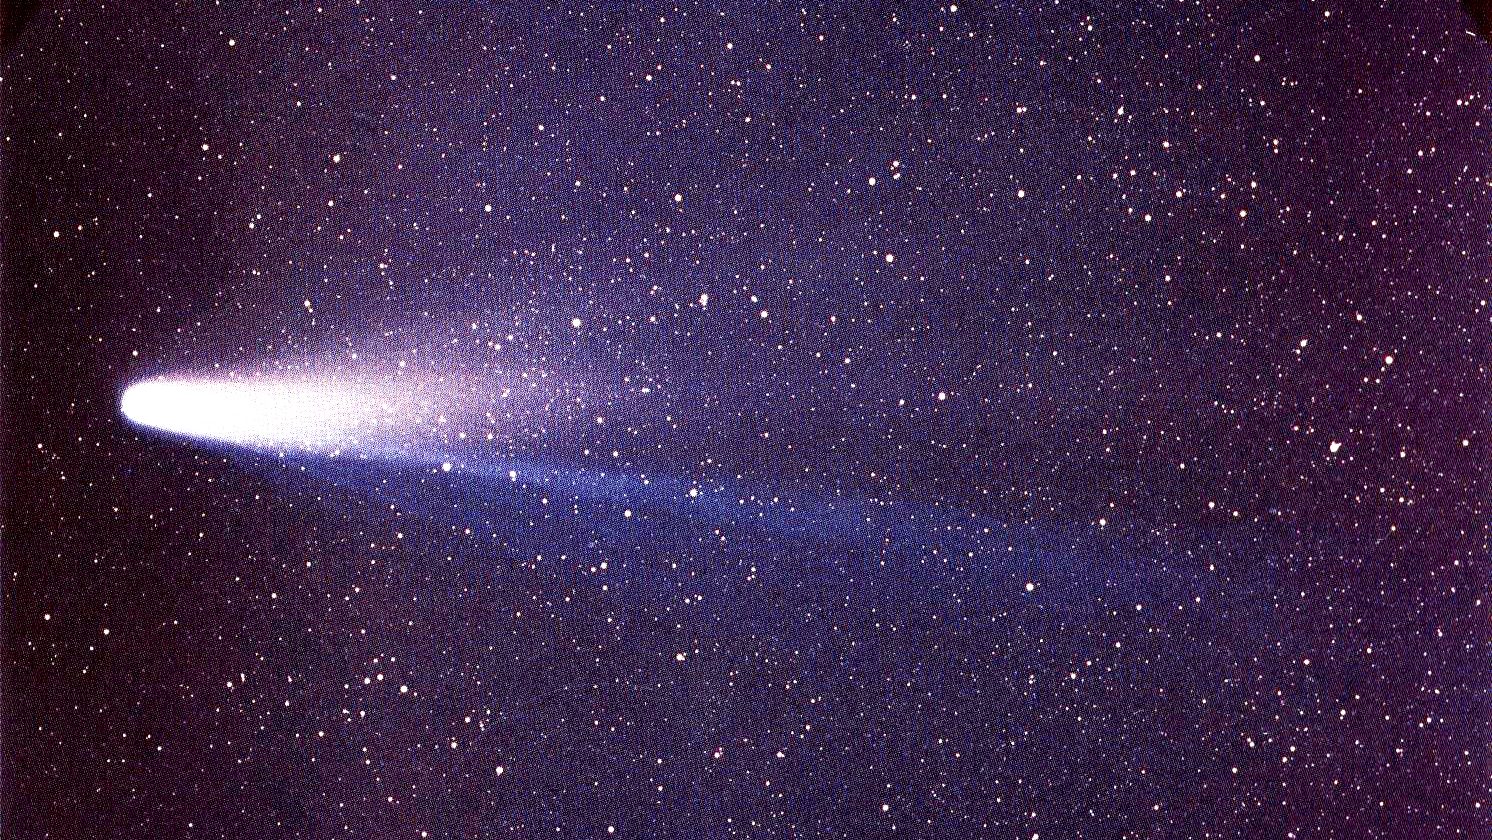 An image of Halley's comet in the sky.